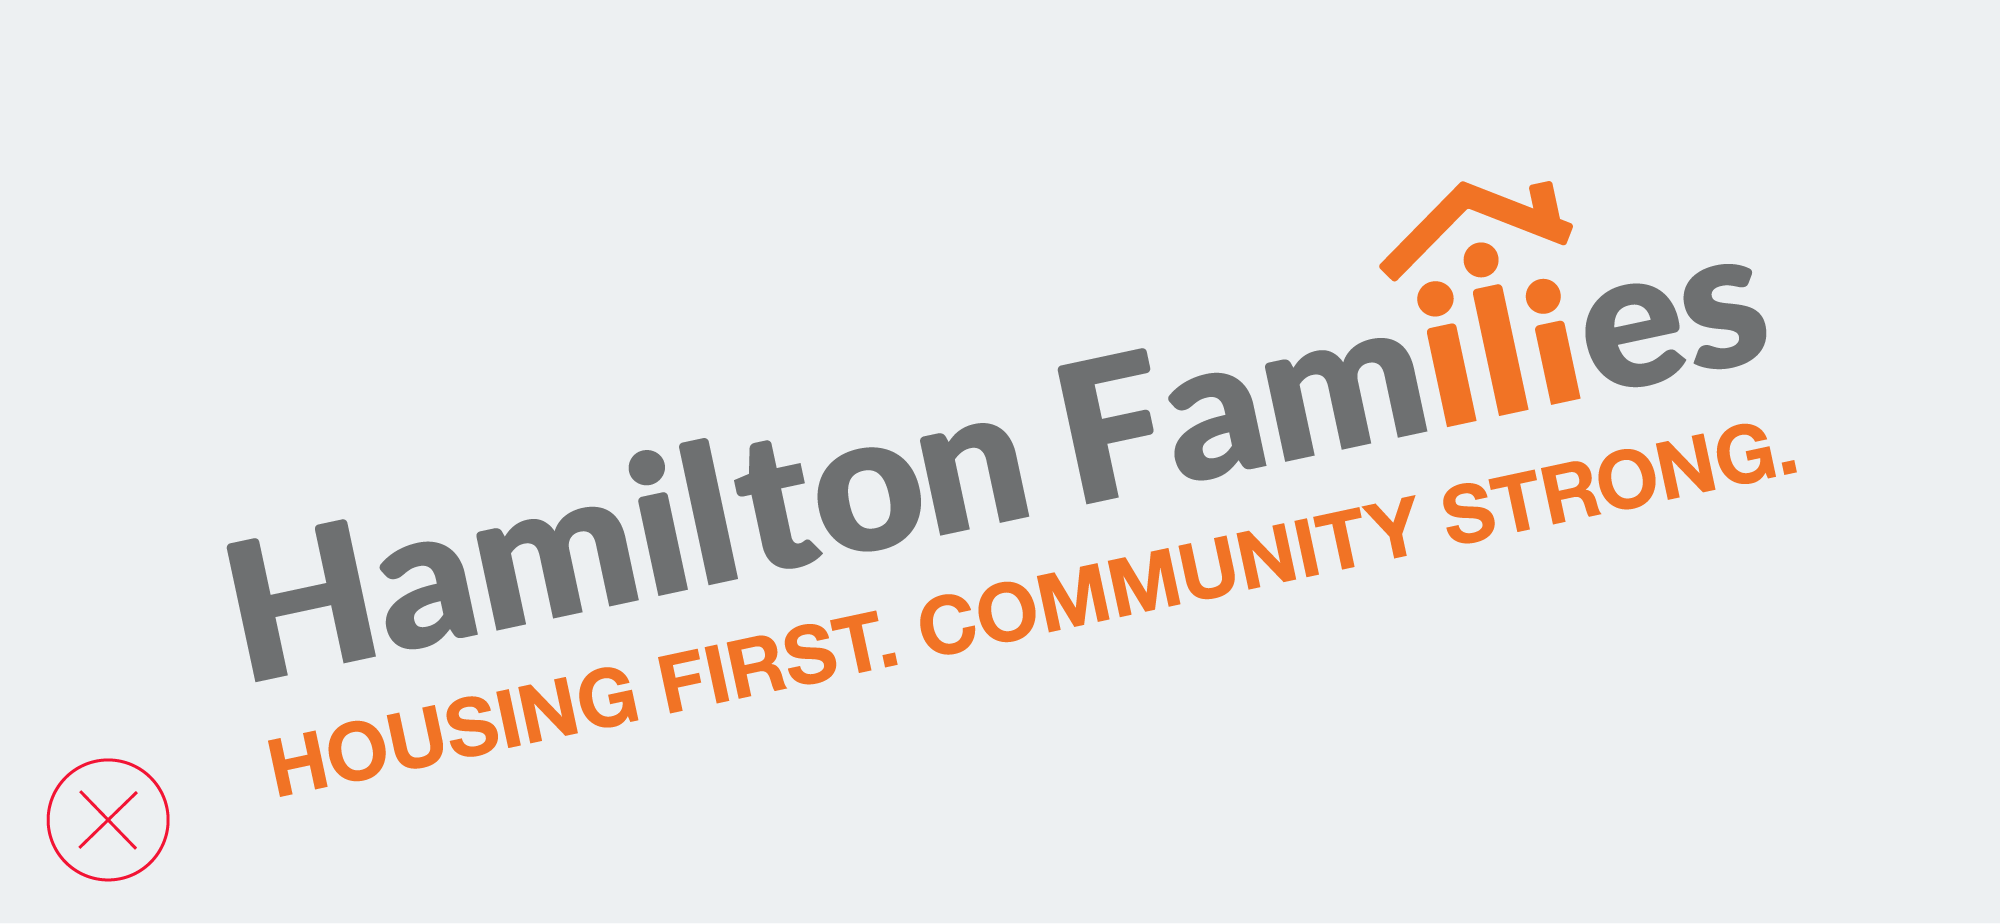 hamilton-families-brand-guidelines_logos-incorrect-usage-04.png